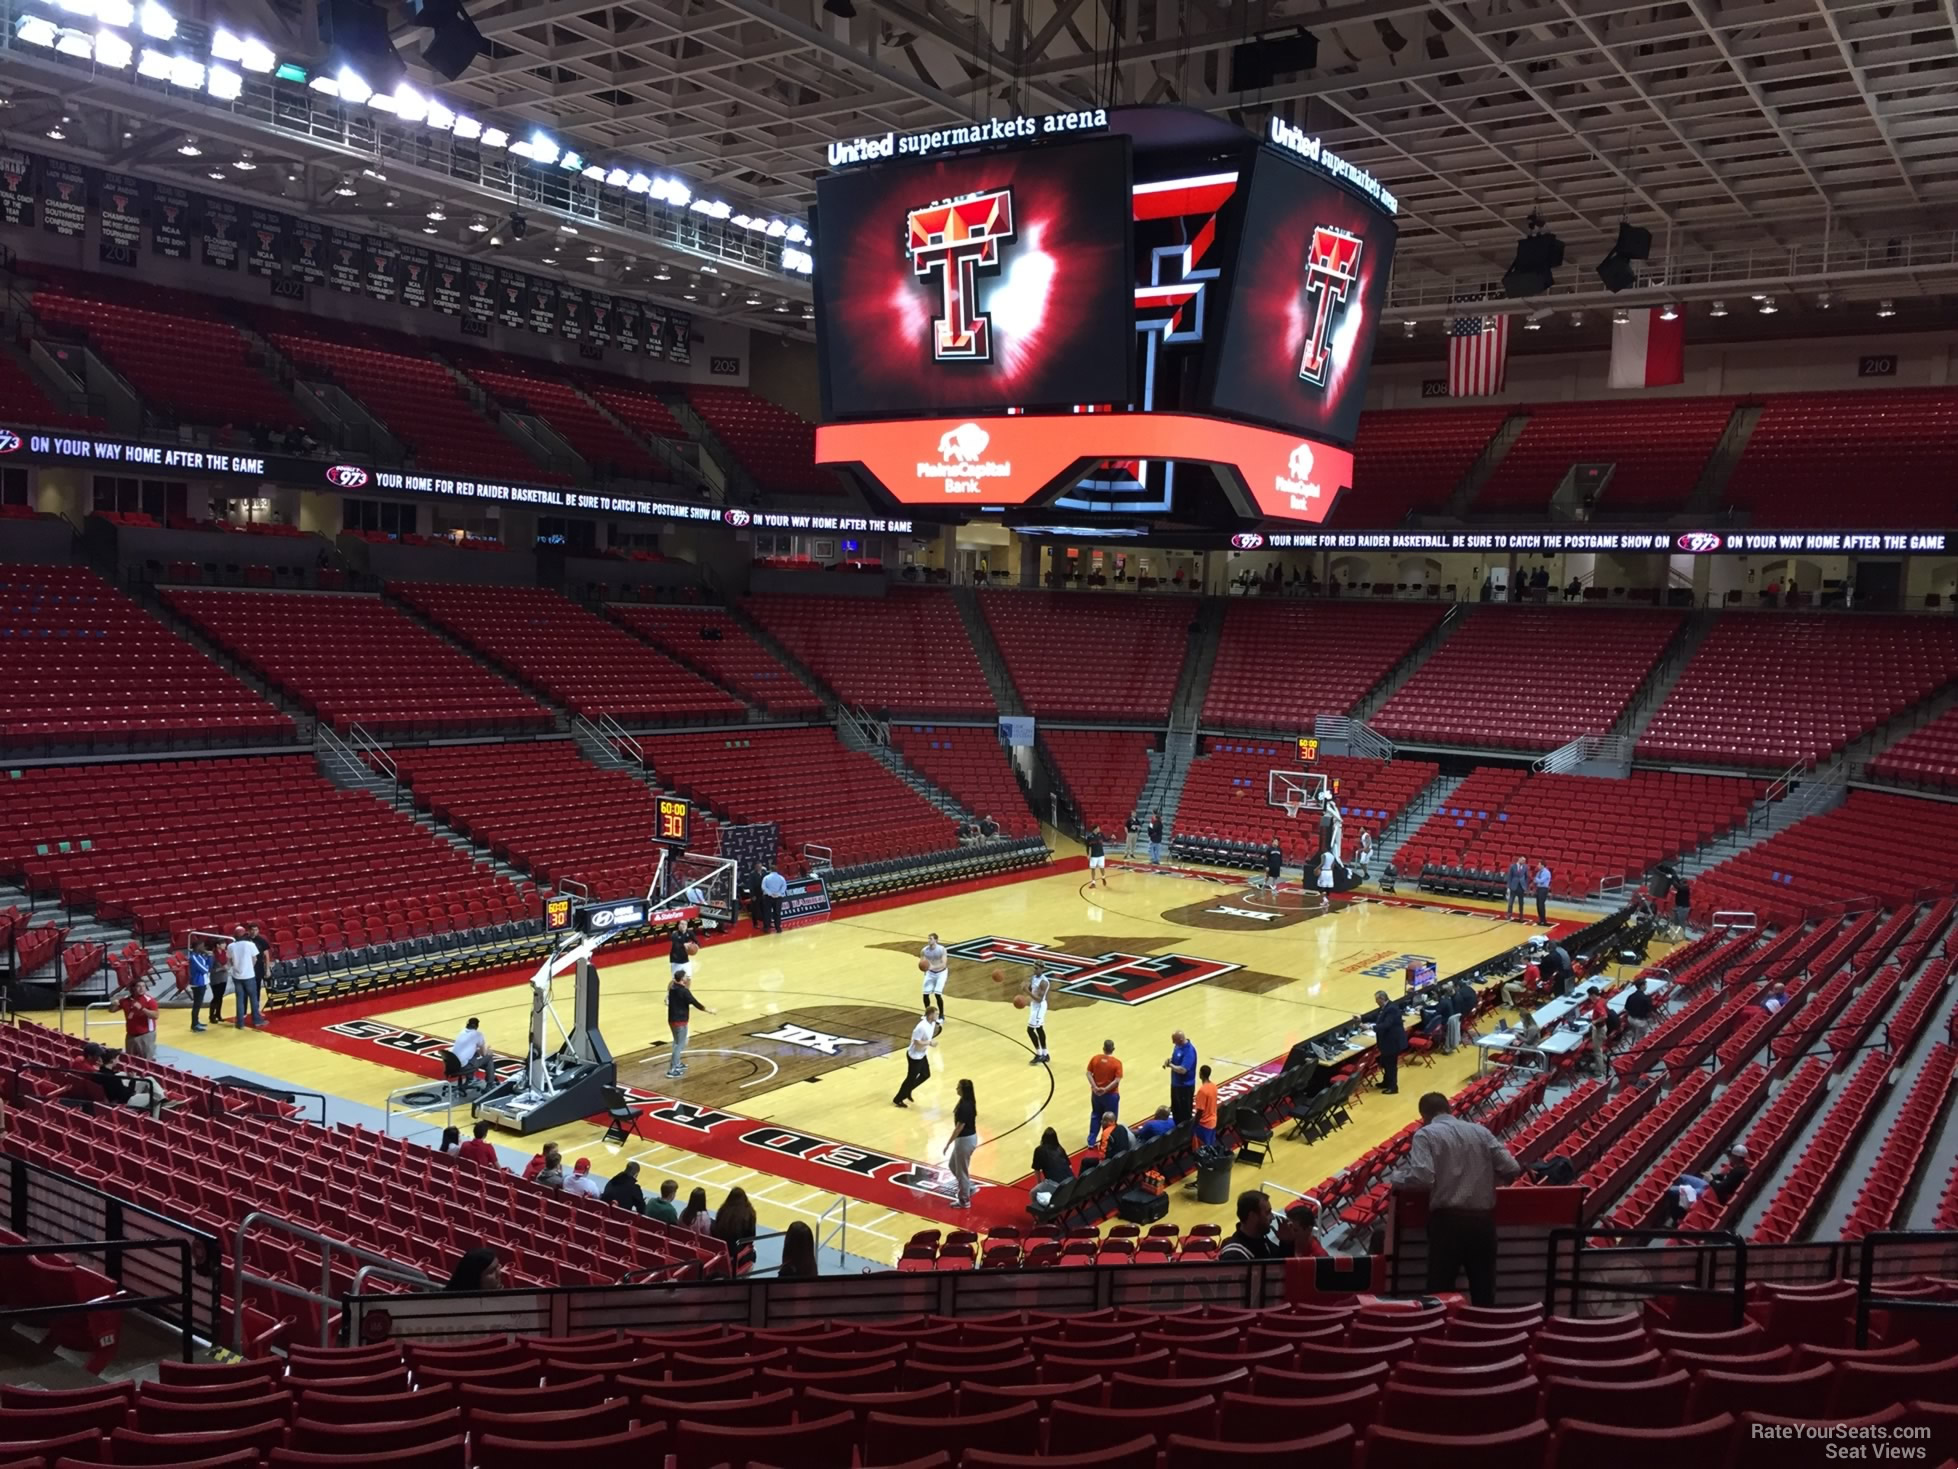 section 117, row 25 seat view  - united supermarkets arena